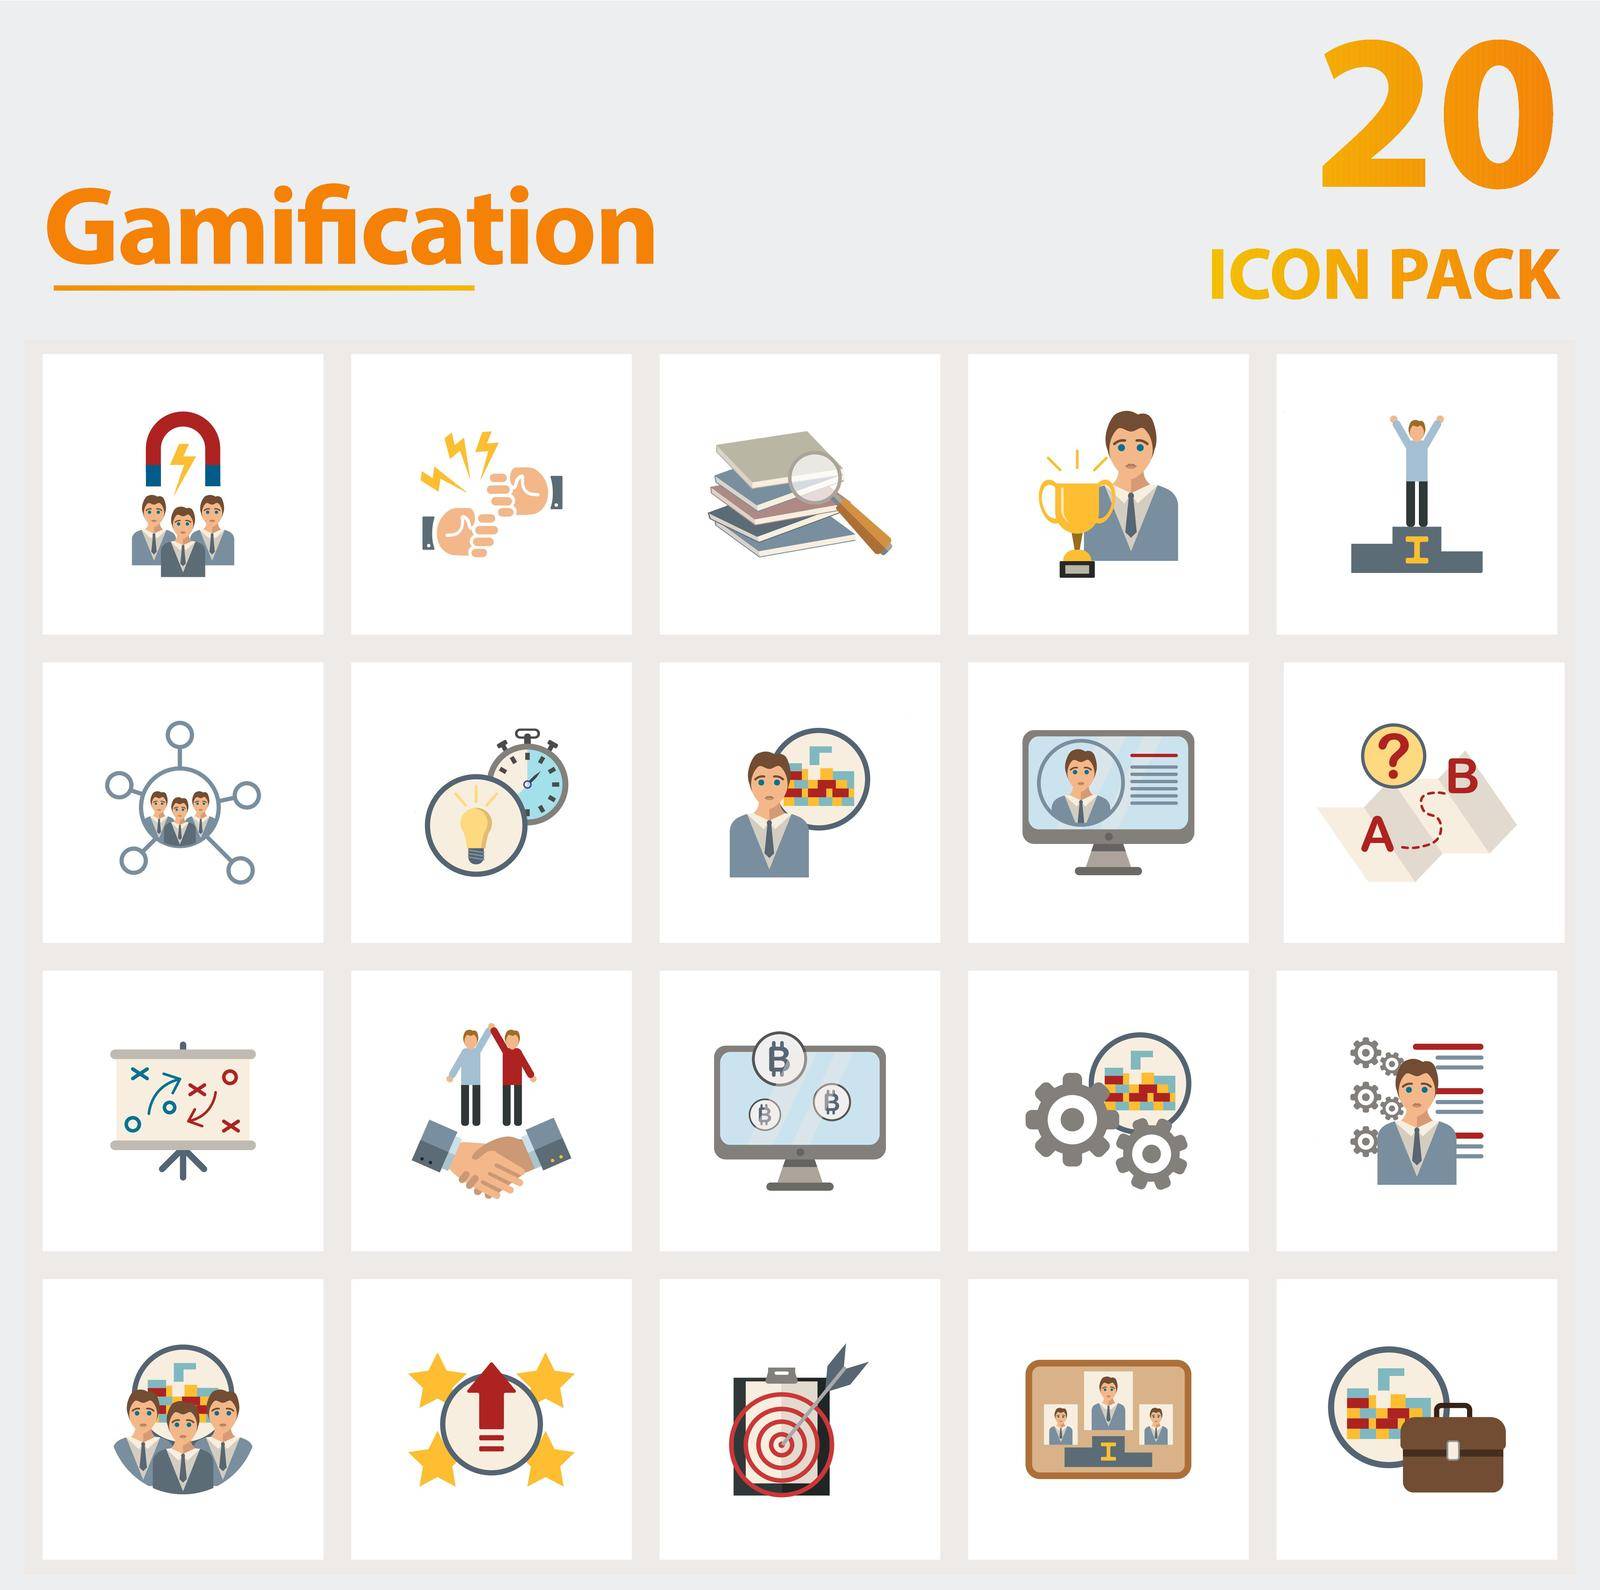 Gamification icon set. Collection of simple elements such as the user engagement, challenge, learning, game thinking, avatar, strategy, reward and other icons.